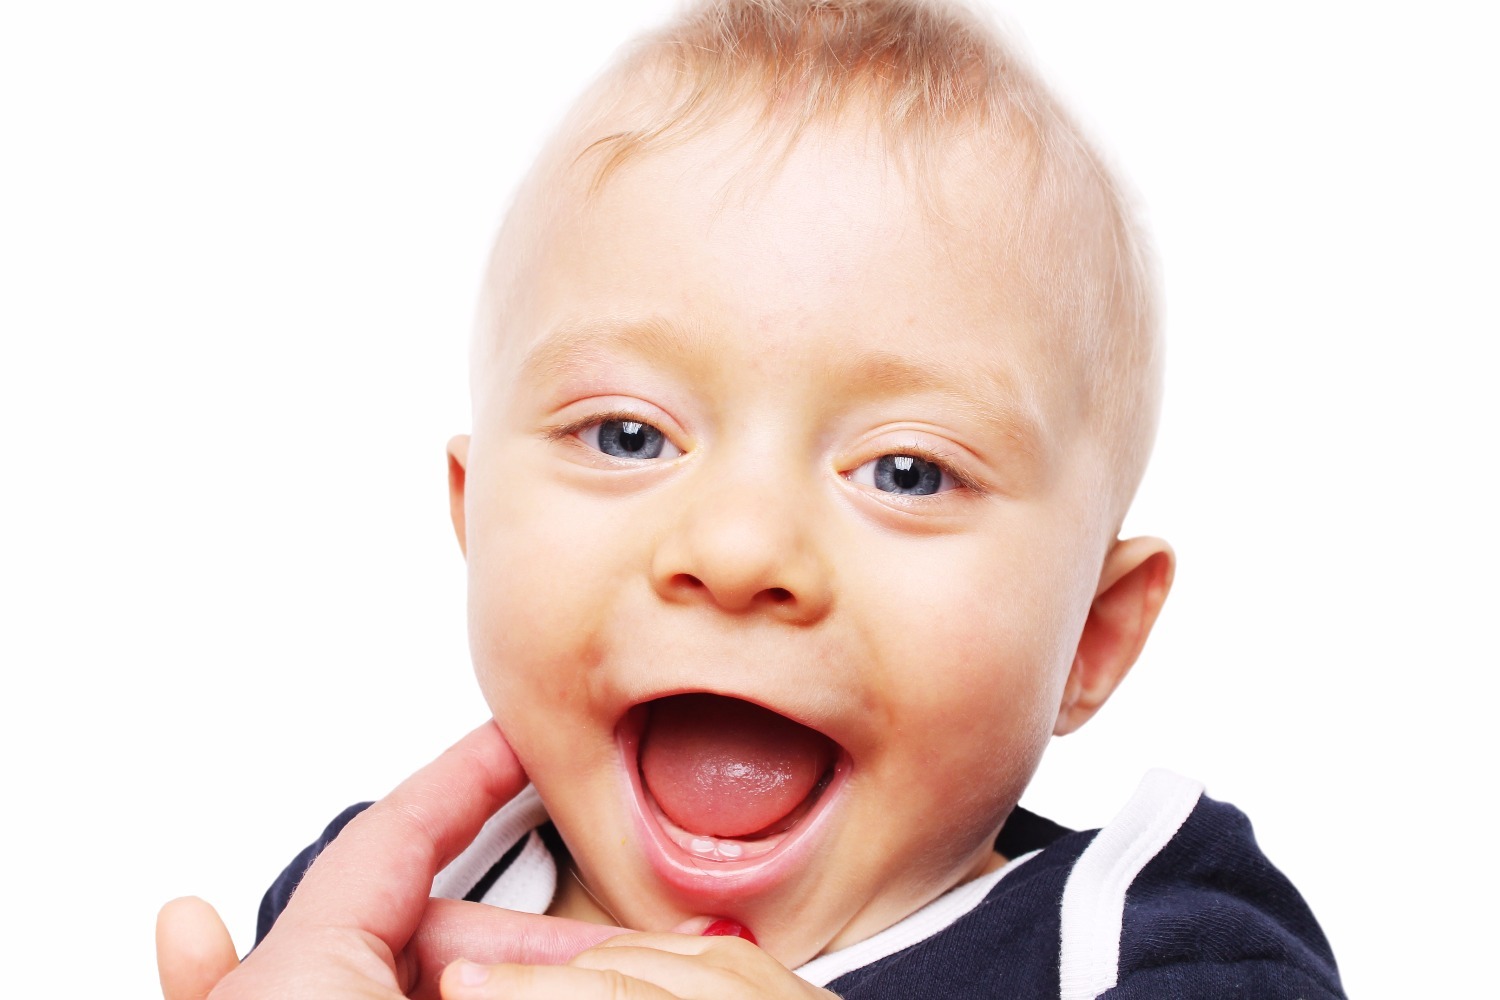 Teething 101: What to expect when your baby sprouts those pearly whites